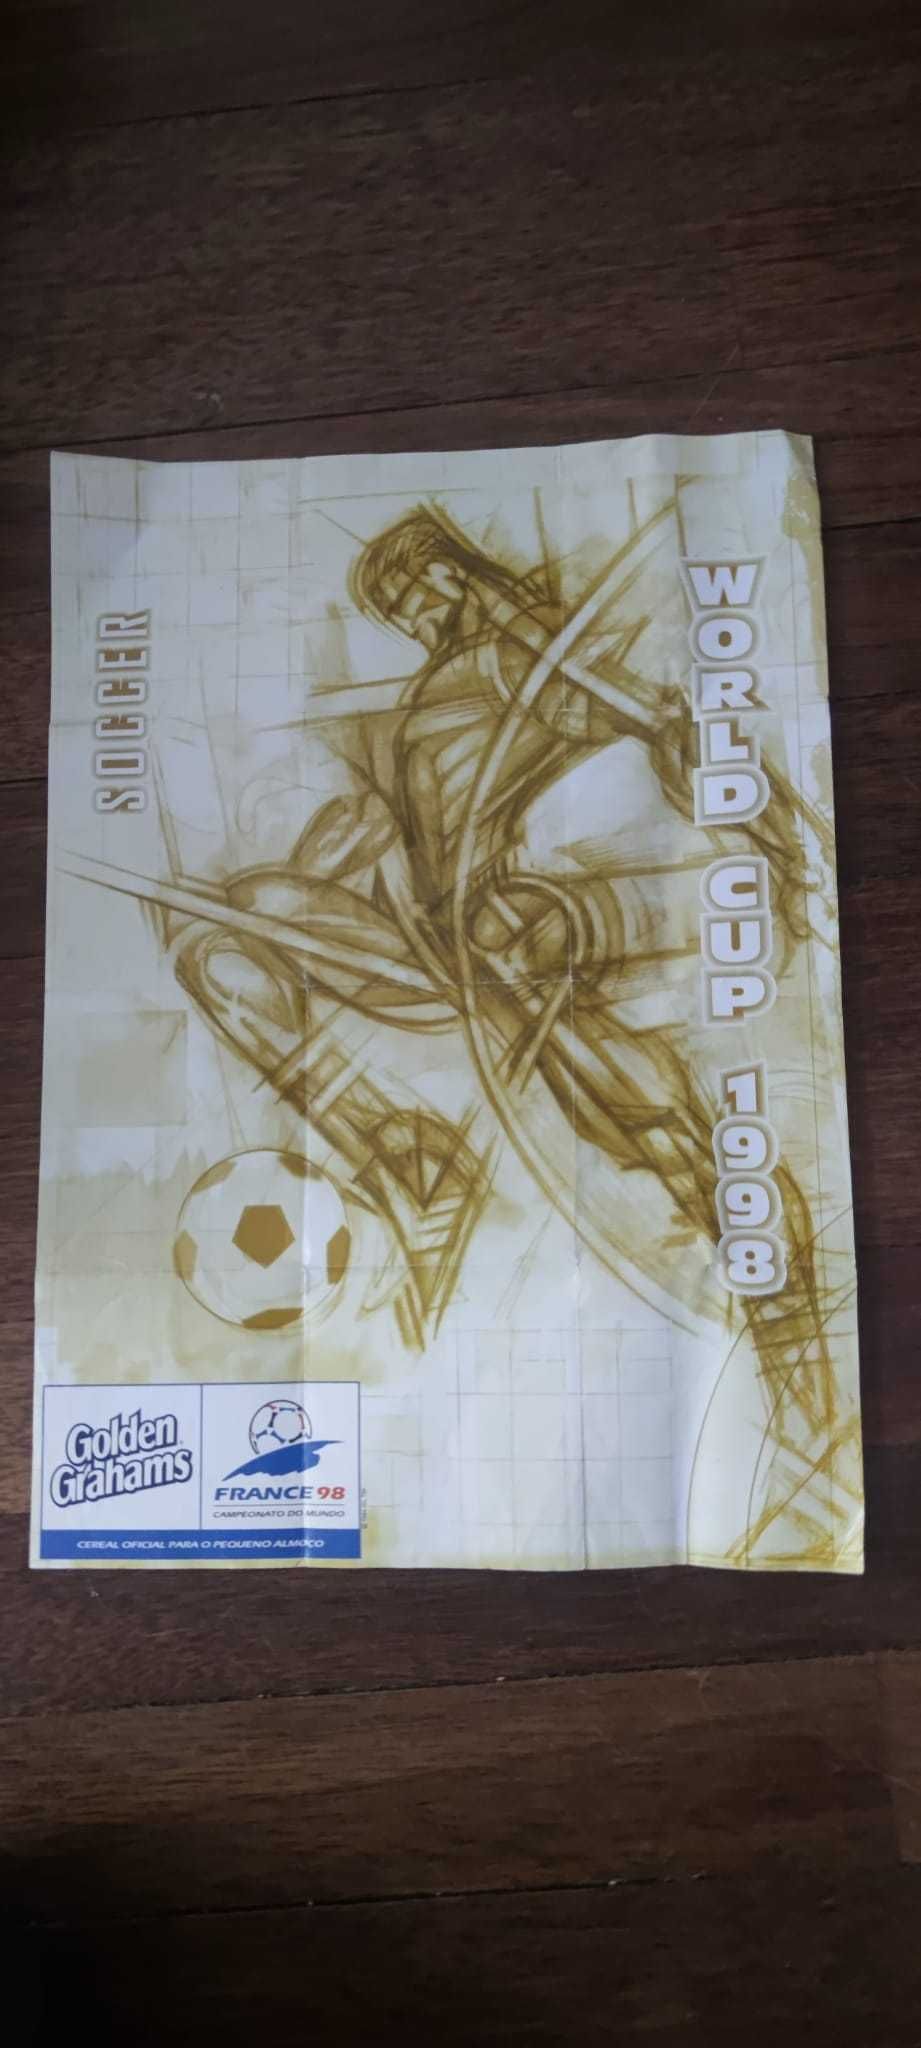 Pósters World Cup 98 Golden Grahams